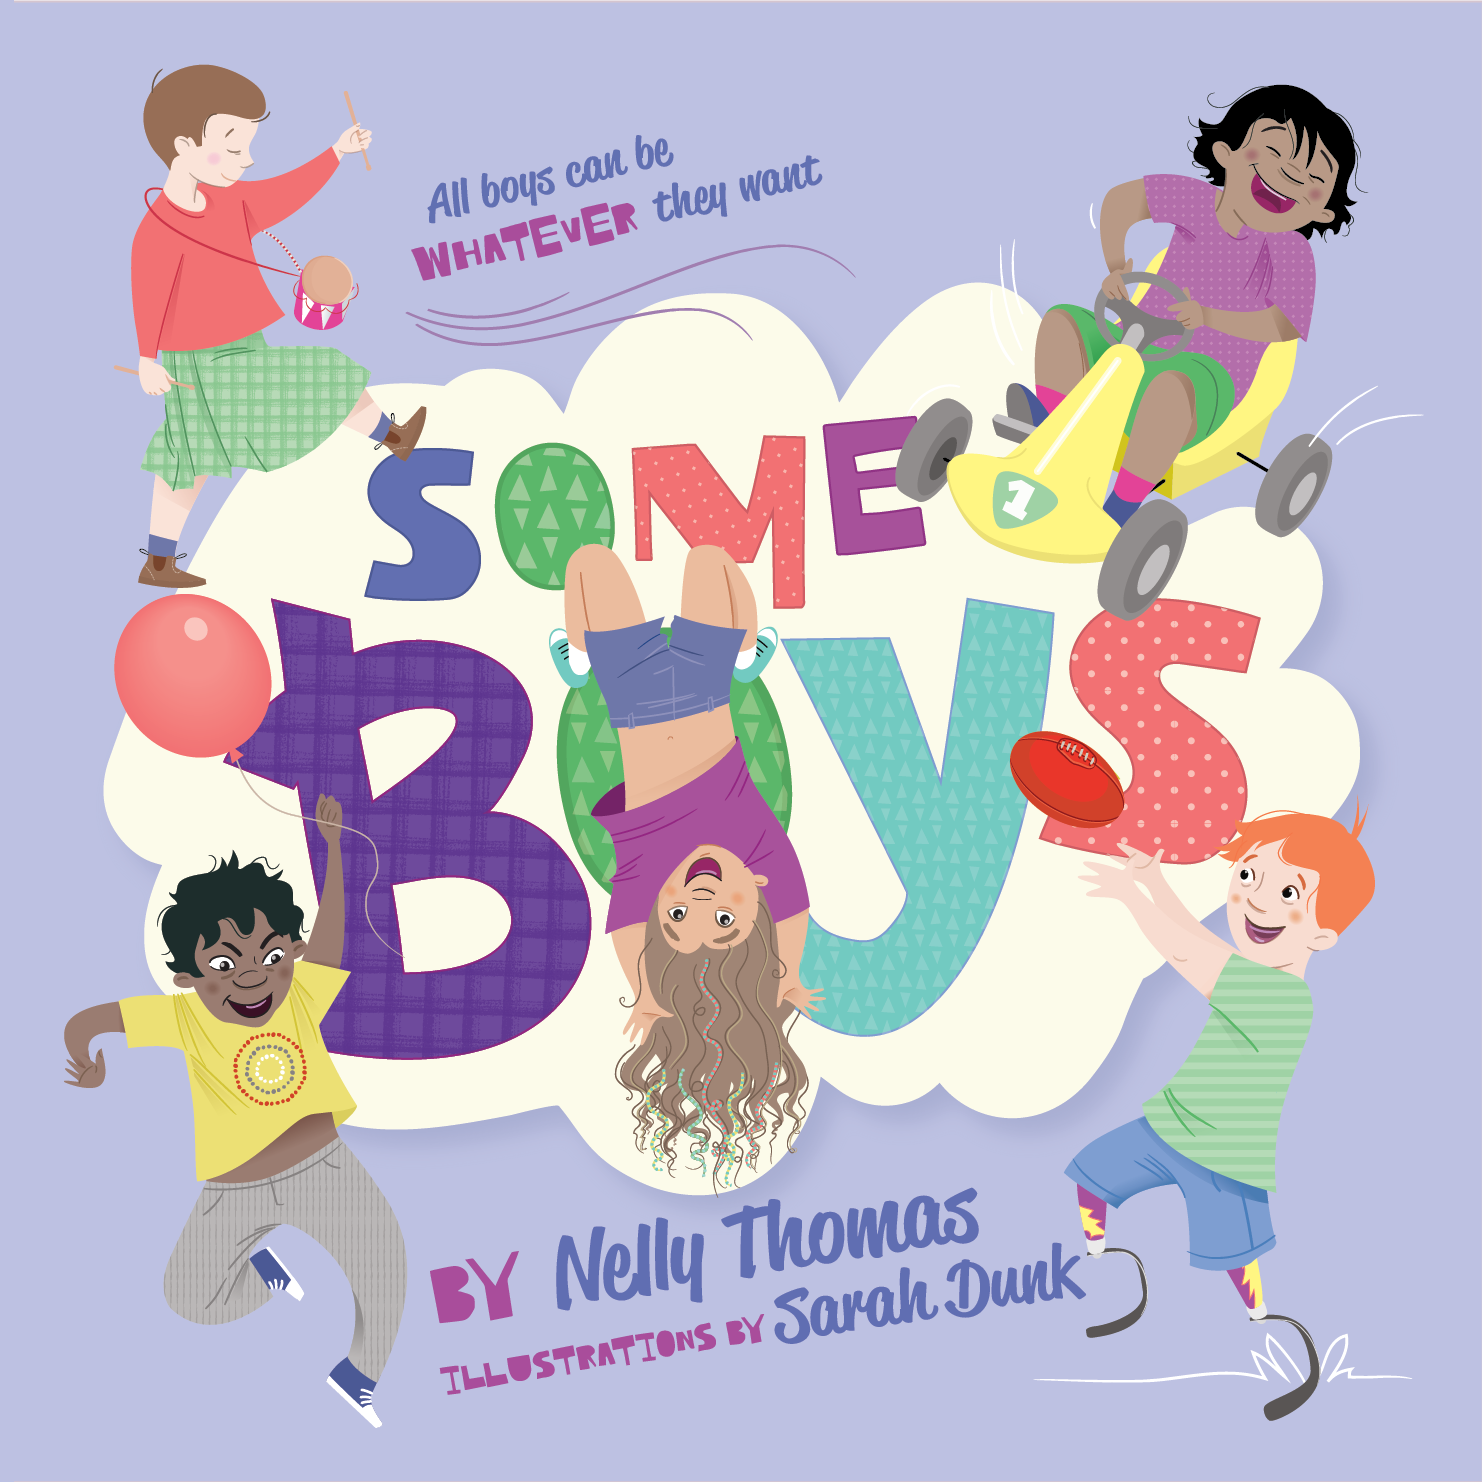  SOME BOYS by Nelly Thomas  Some Kid’s Books with Piccolo Nero  Digital 